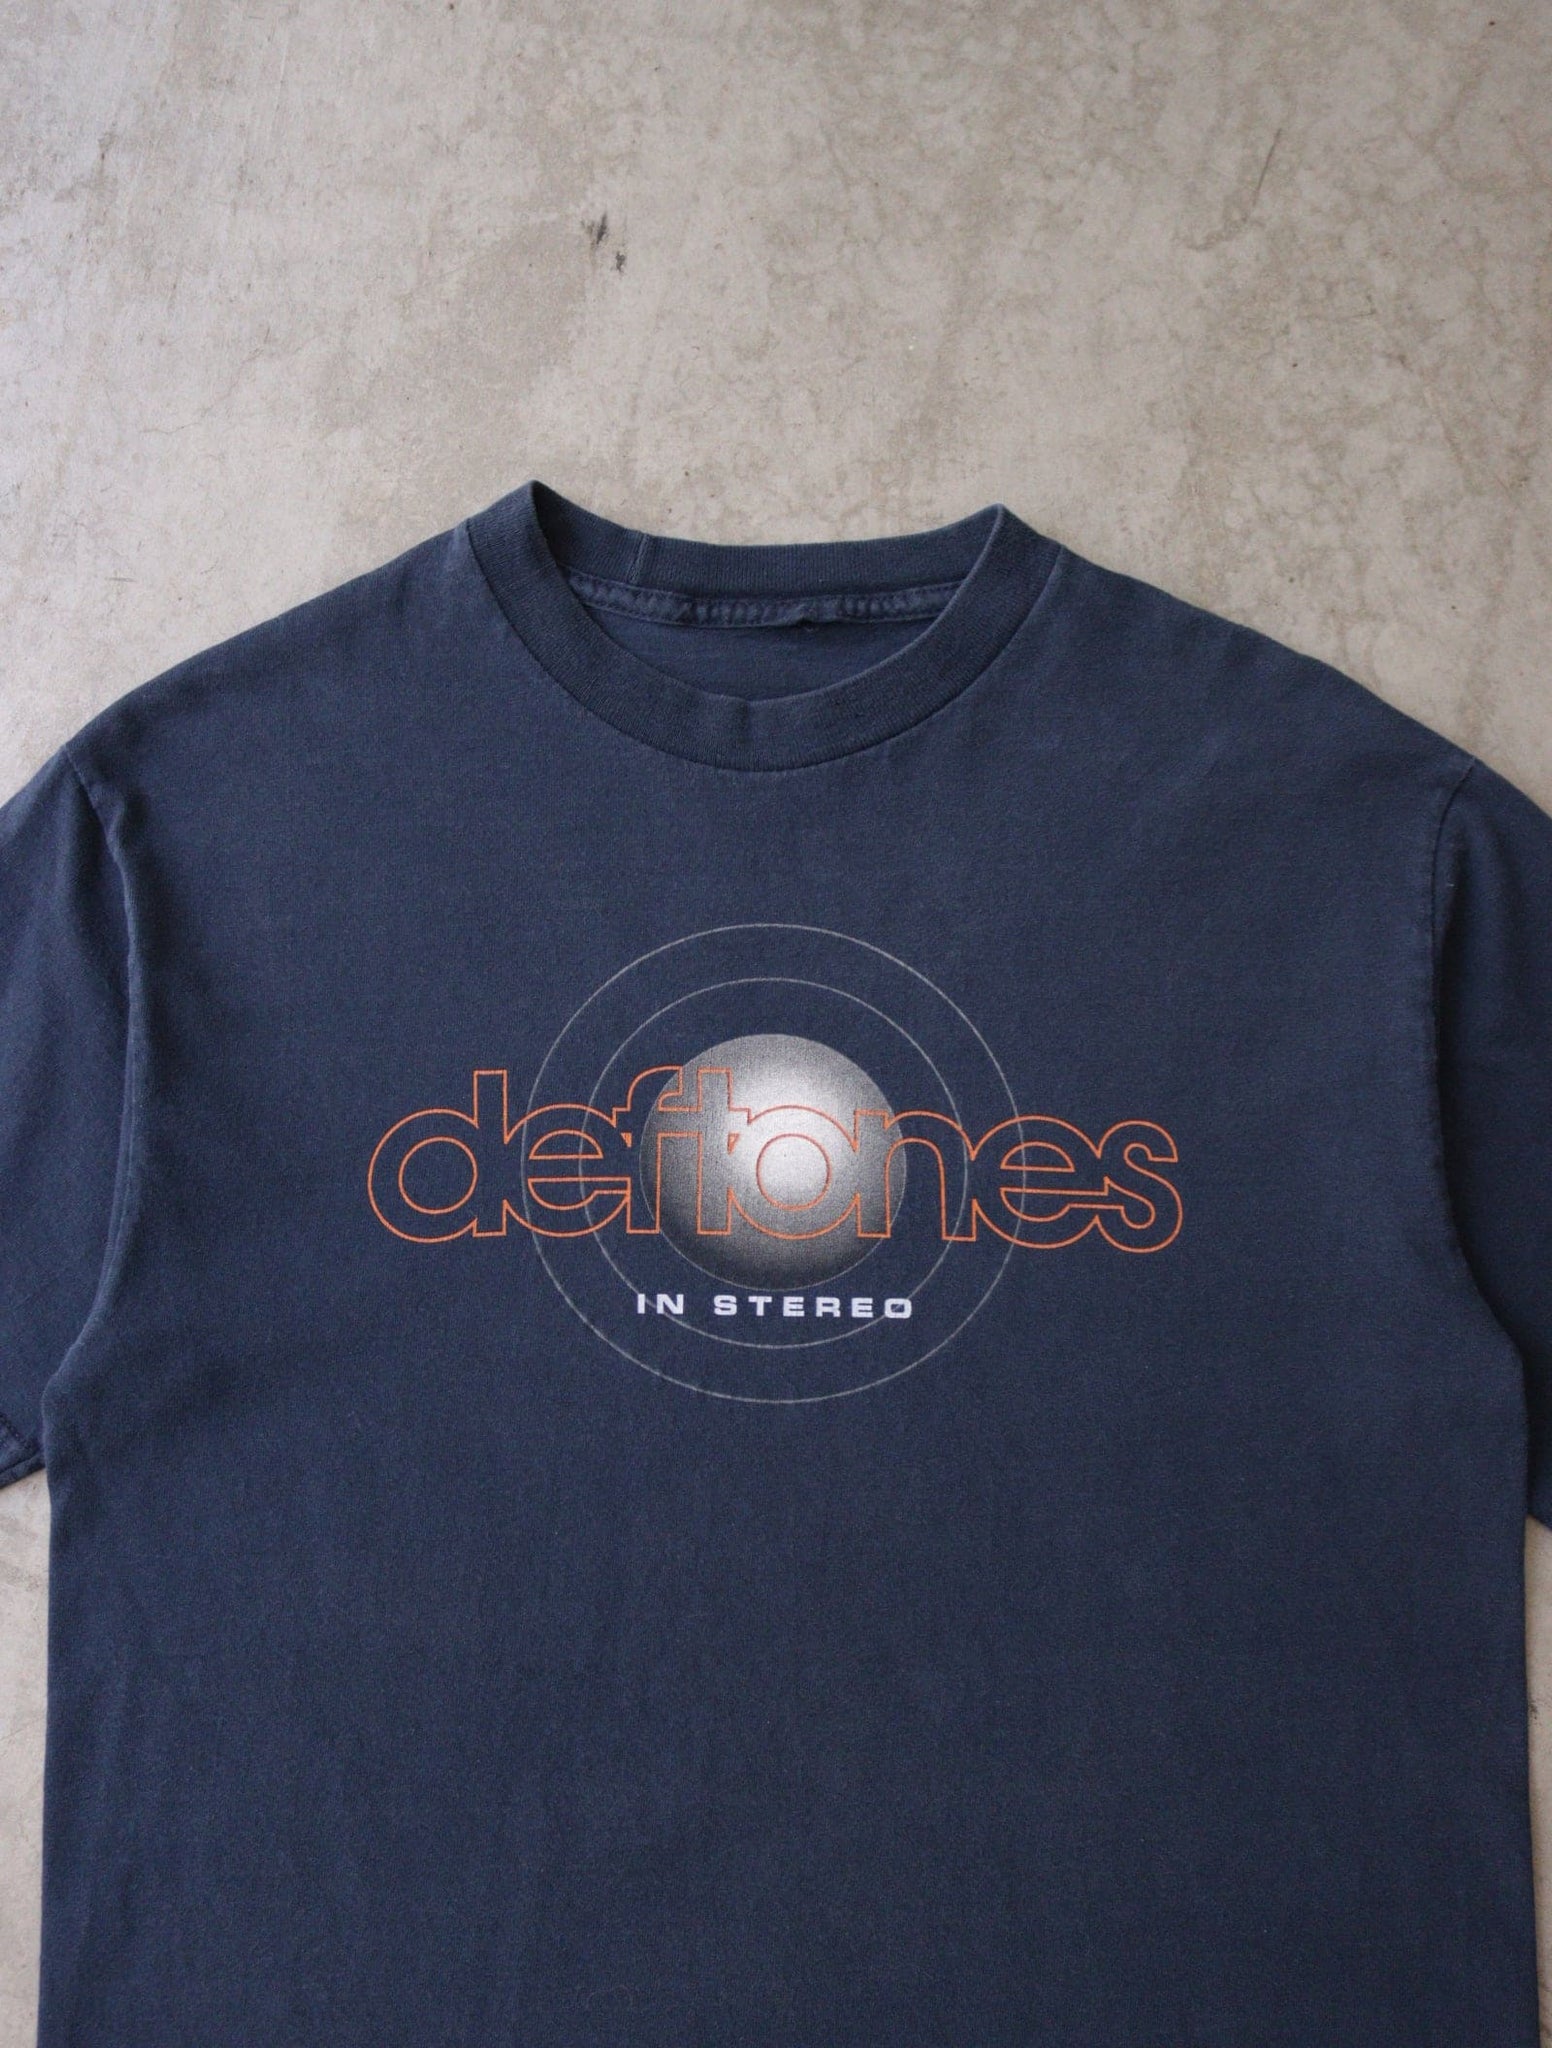 1990S DEFTONES IN STEREO BAND TEE